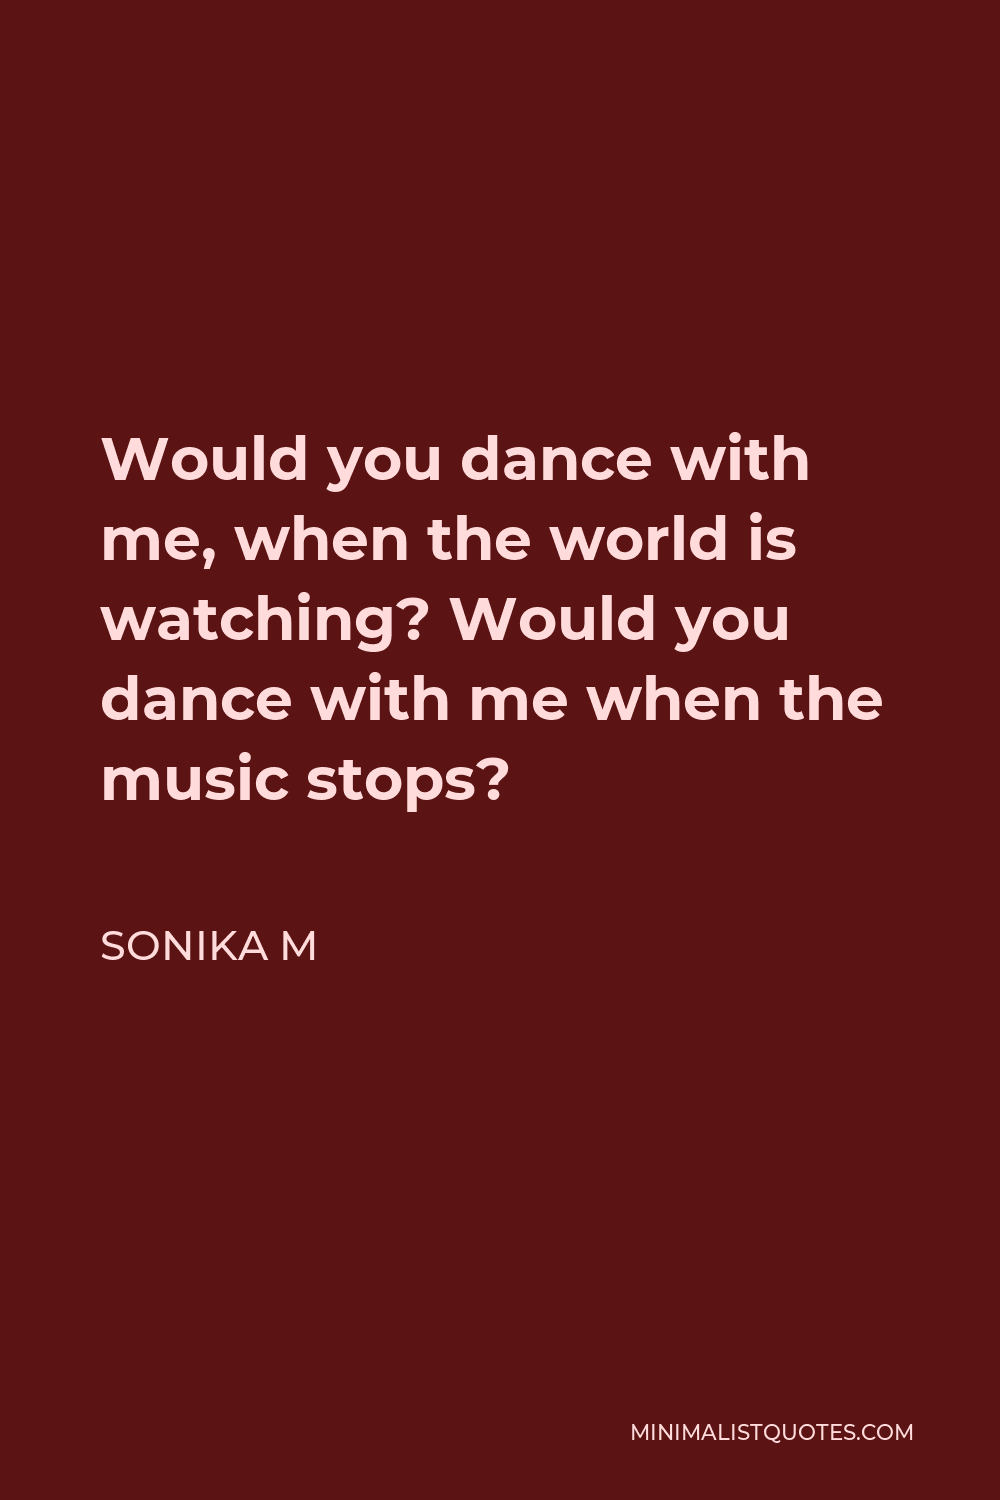 Sonika M Quote - Would you dance with me, when the world is watching? Would you dance with me when the music stops?